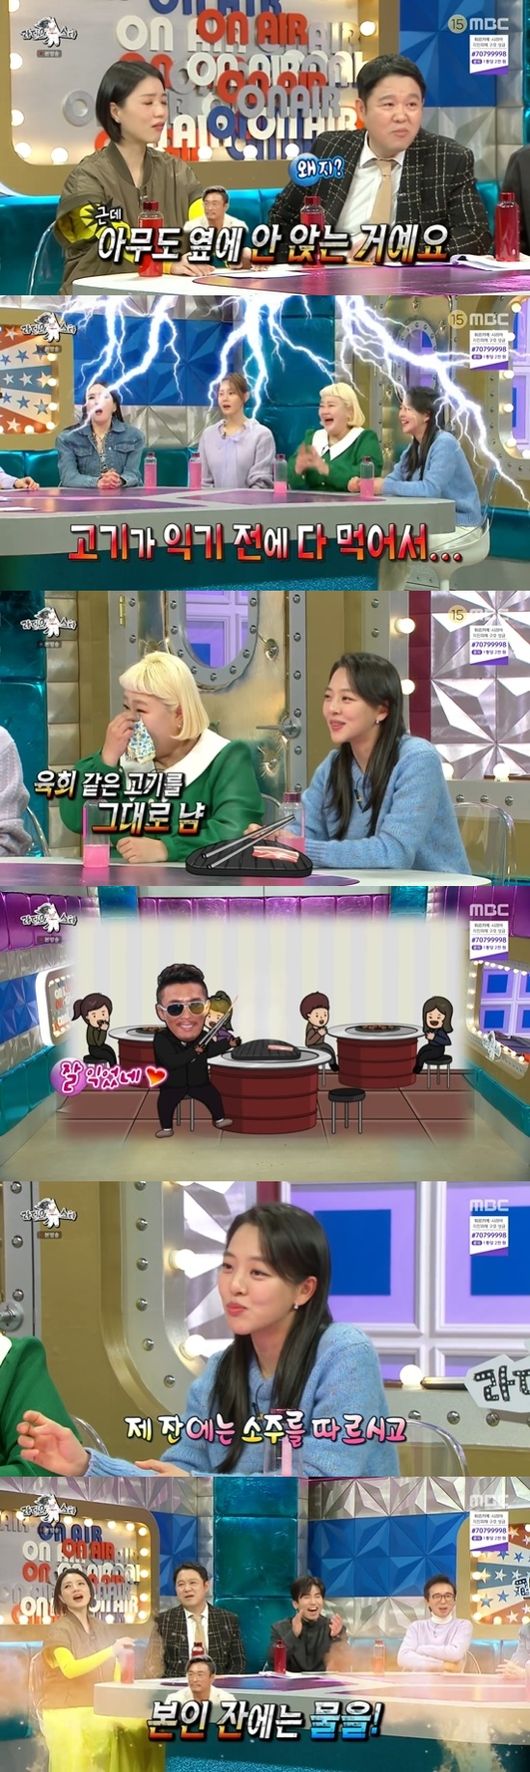 Kim Bo-reum confessed to Yoshihiro Akiyama why the romang he had was broken.MBC entertainment Radio Star broadcasted on the afternoon of the 15th was featured in Energy Jade featured by Jang Youngran, Ahn Hyun-mo, Hong Yoon Hwa and Kim Bo-reum.Kim Bo-reum won a silver medal in the speed skating mass start at the 2018 PyeongChang Winter Olympic Games.Since then, he has been reborn as a Spottaner, showing off tremendous power in various sports entertainment such as Sister 2 and Queen of Ssireum.Kim Bo-reum said, Mo Tae-bum recommended my agency, and there were Yoshihiro Akiyama and Kim Dong-hyun in the agency. I did not hesitate because they were the top people in one field.And there was Romang about Yoshihiro Akiyama. It was cool watching TV, he said.The first time I had an alcoholic drink, I straightened my shoulders and walked in with a radio star. I sat down and nobody sat down at my brothers table because I ate it before the meat was cooked.I do not take off the radio star when I drink alcohol drink at the restaurant. Yoo Se-yoon said, Do not you think its ripe? Kim Bo-reum added, I had a drink with him, but he had a drink on Radio Star. He poured soju into my glass and water into his glass. It was a bit of a shattered illusion, he added, laughing.Radio Star broadcast screen capture